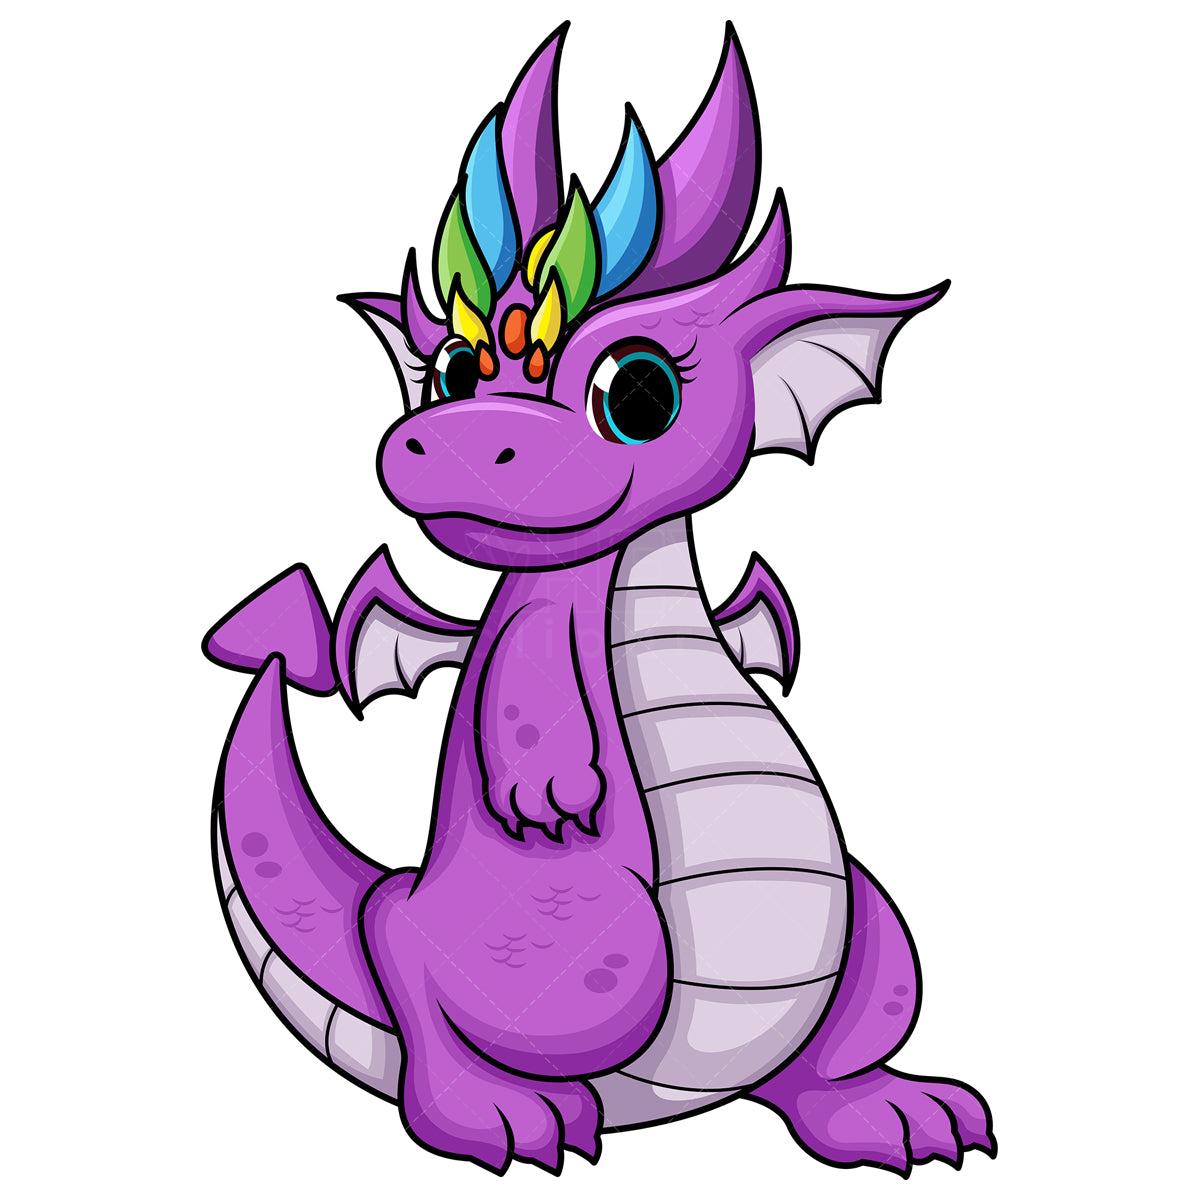 Royalty-free stock vector illustration of a purple female dragon.